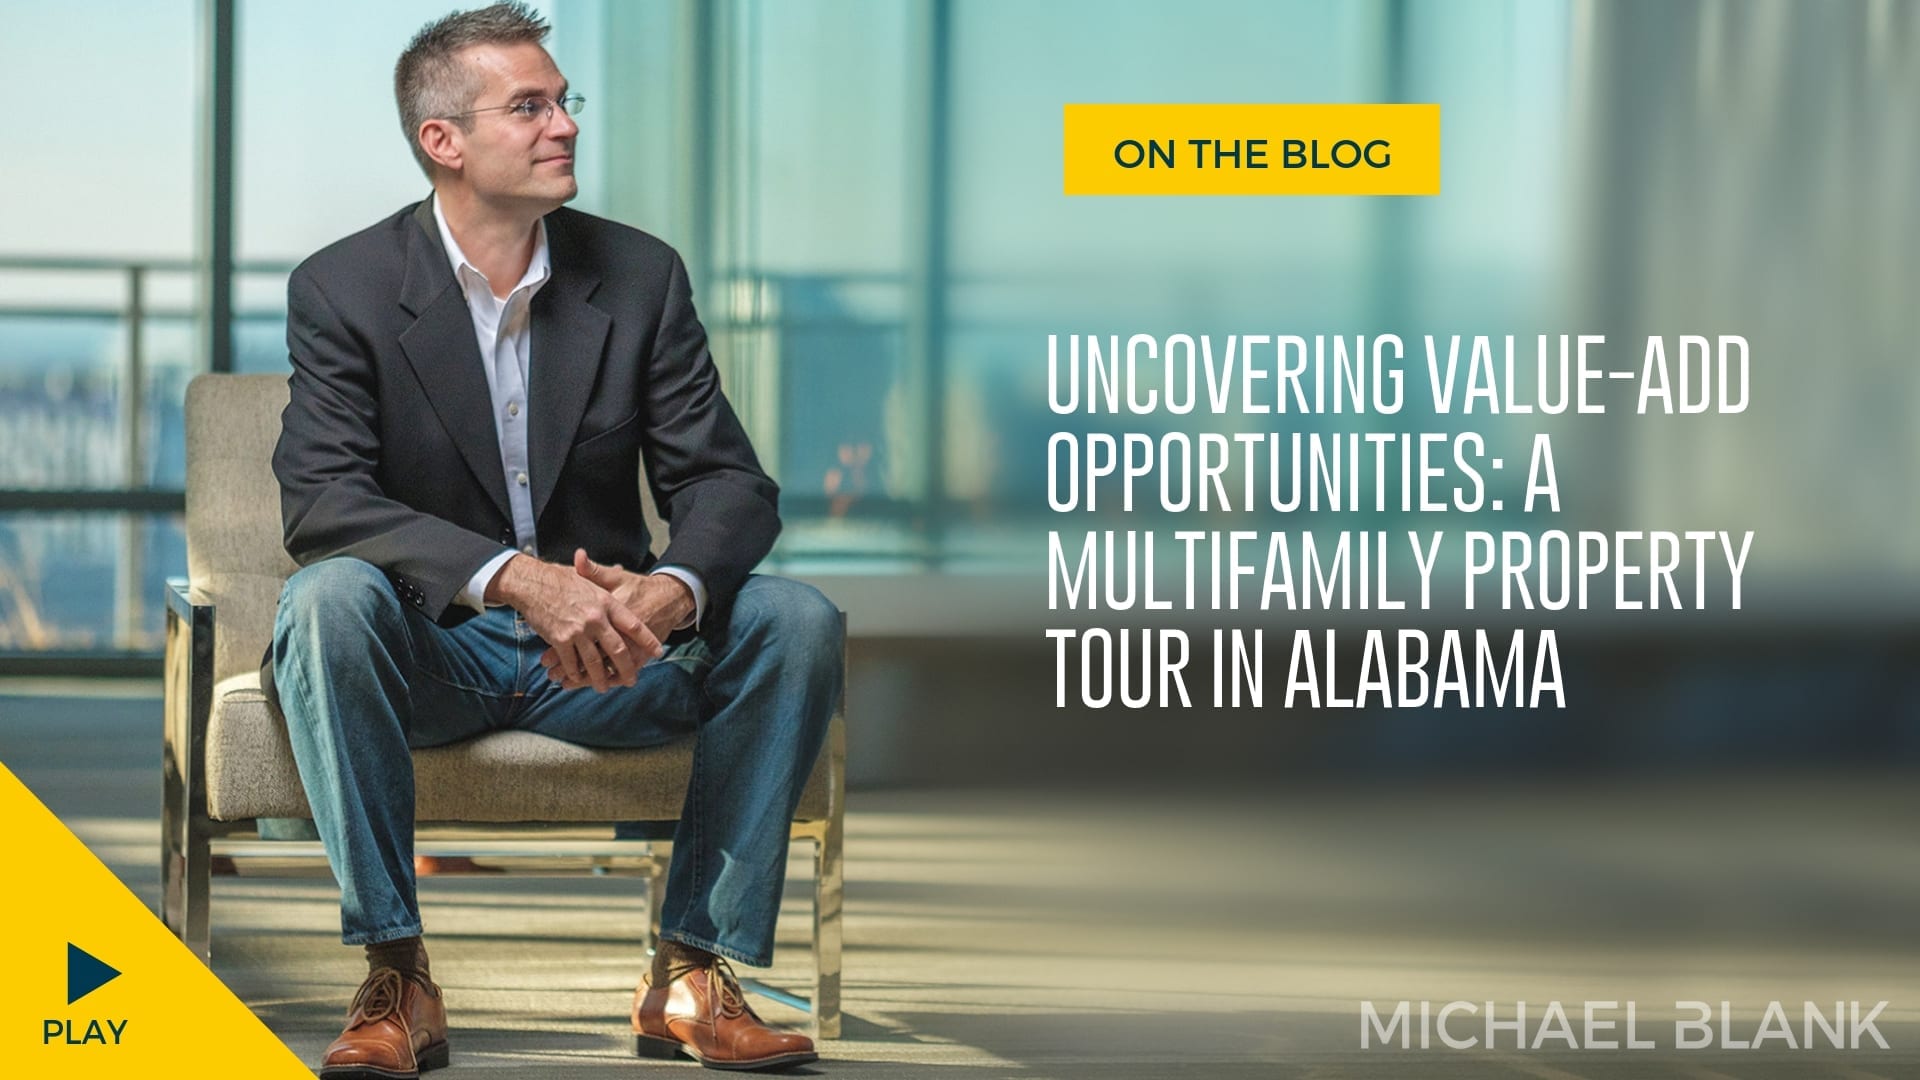 Uncovering Value-Add Opportunities: A Multifamily Property Tour in Alabama